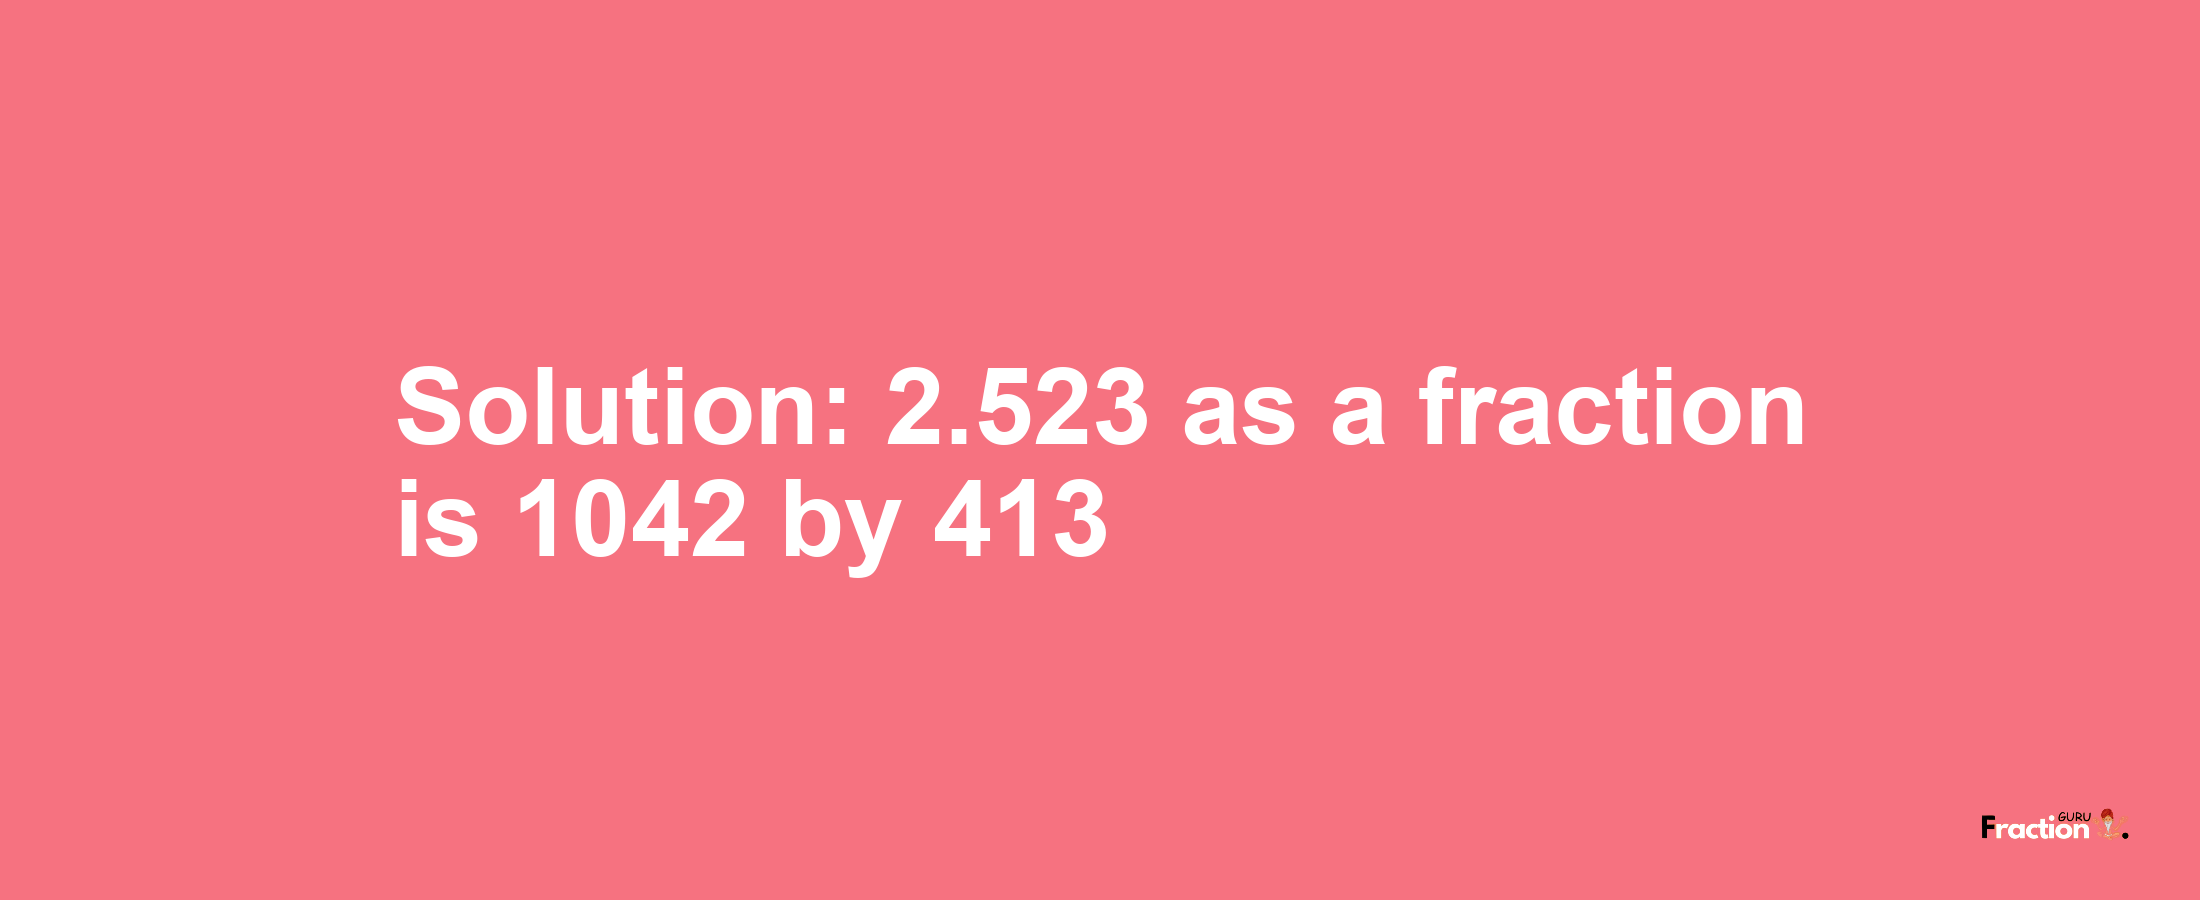 Solution:2.523 as a fraction is 1042/413